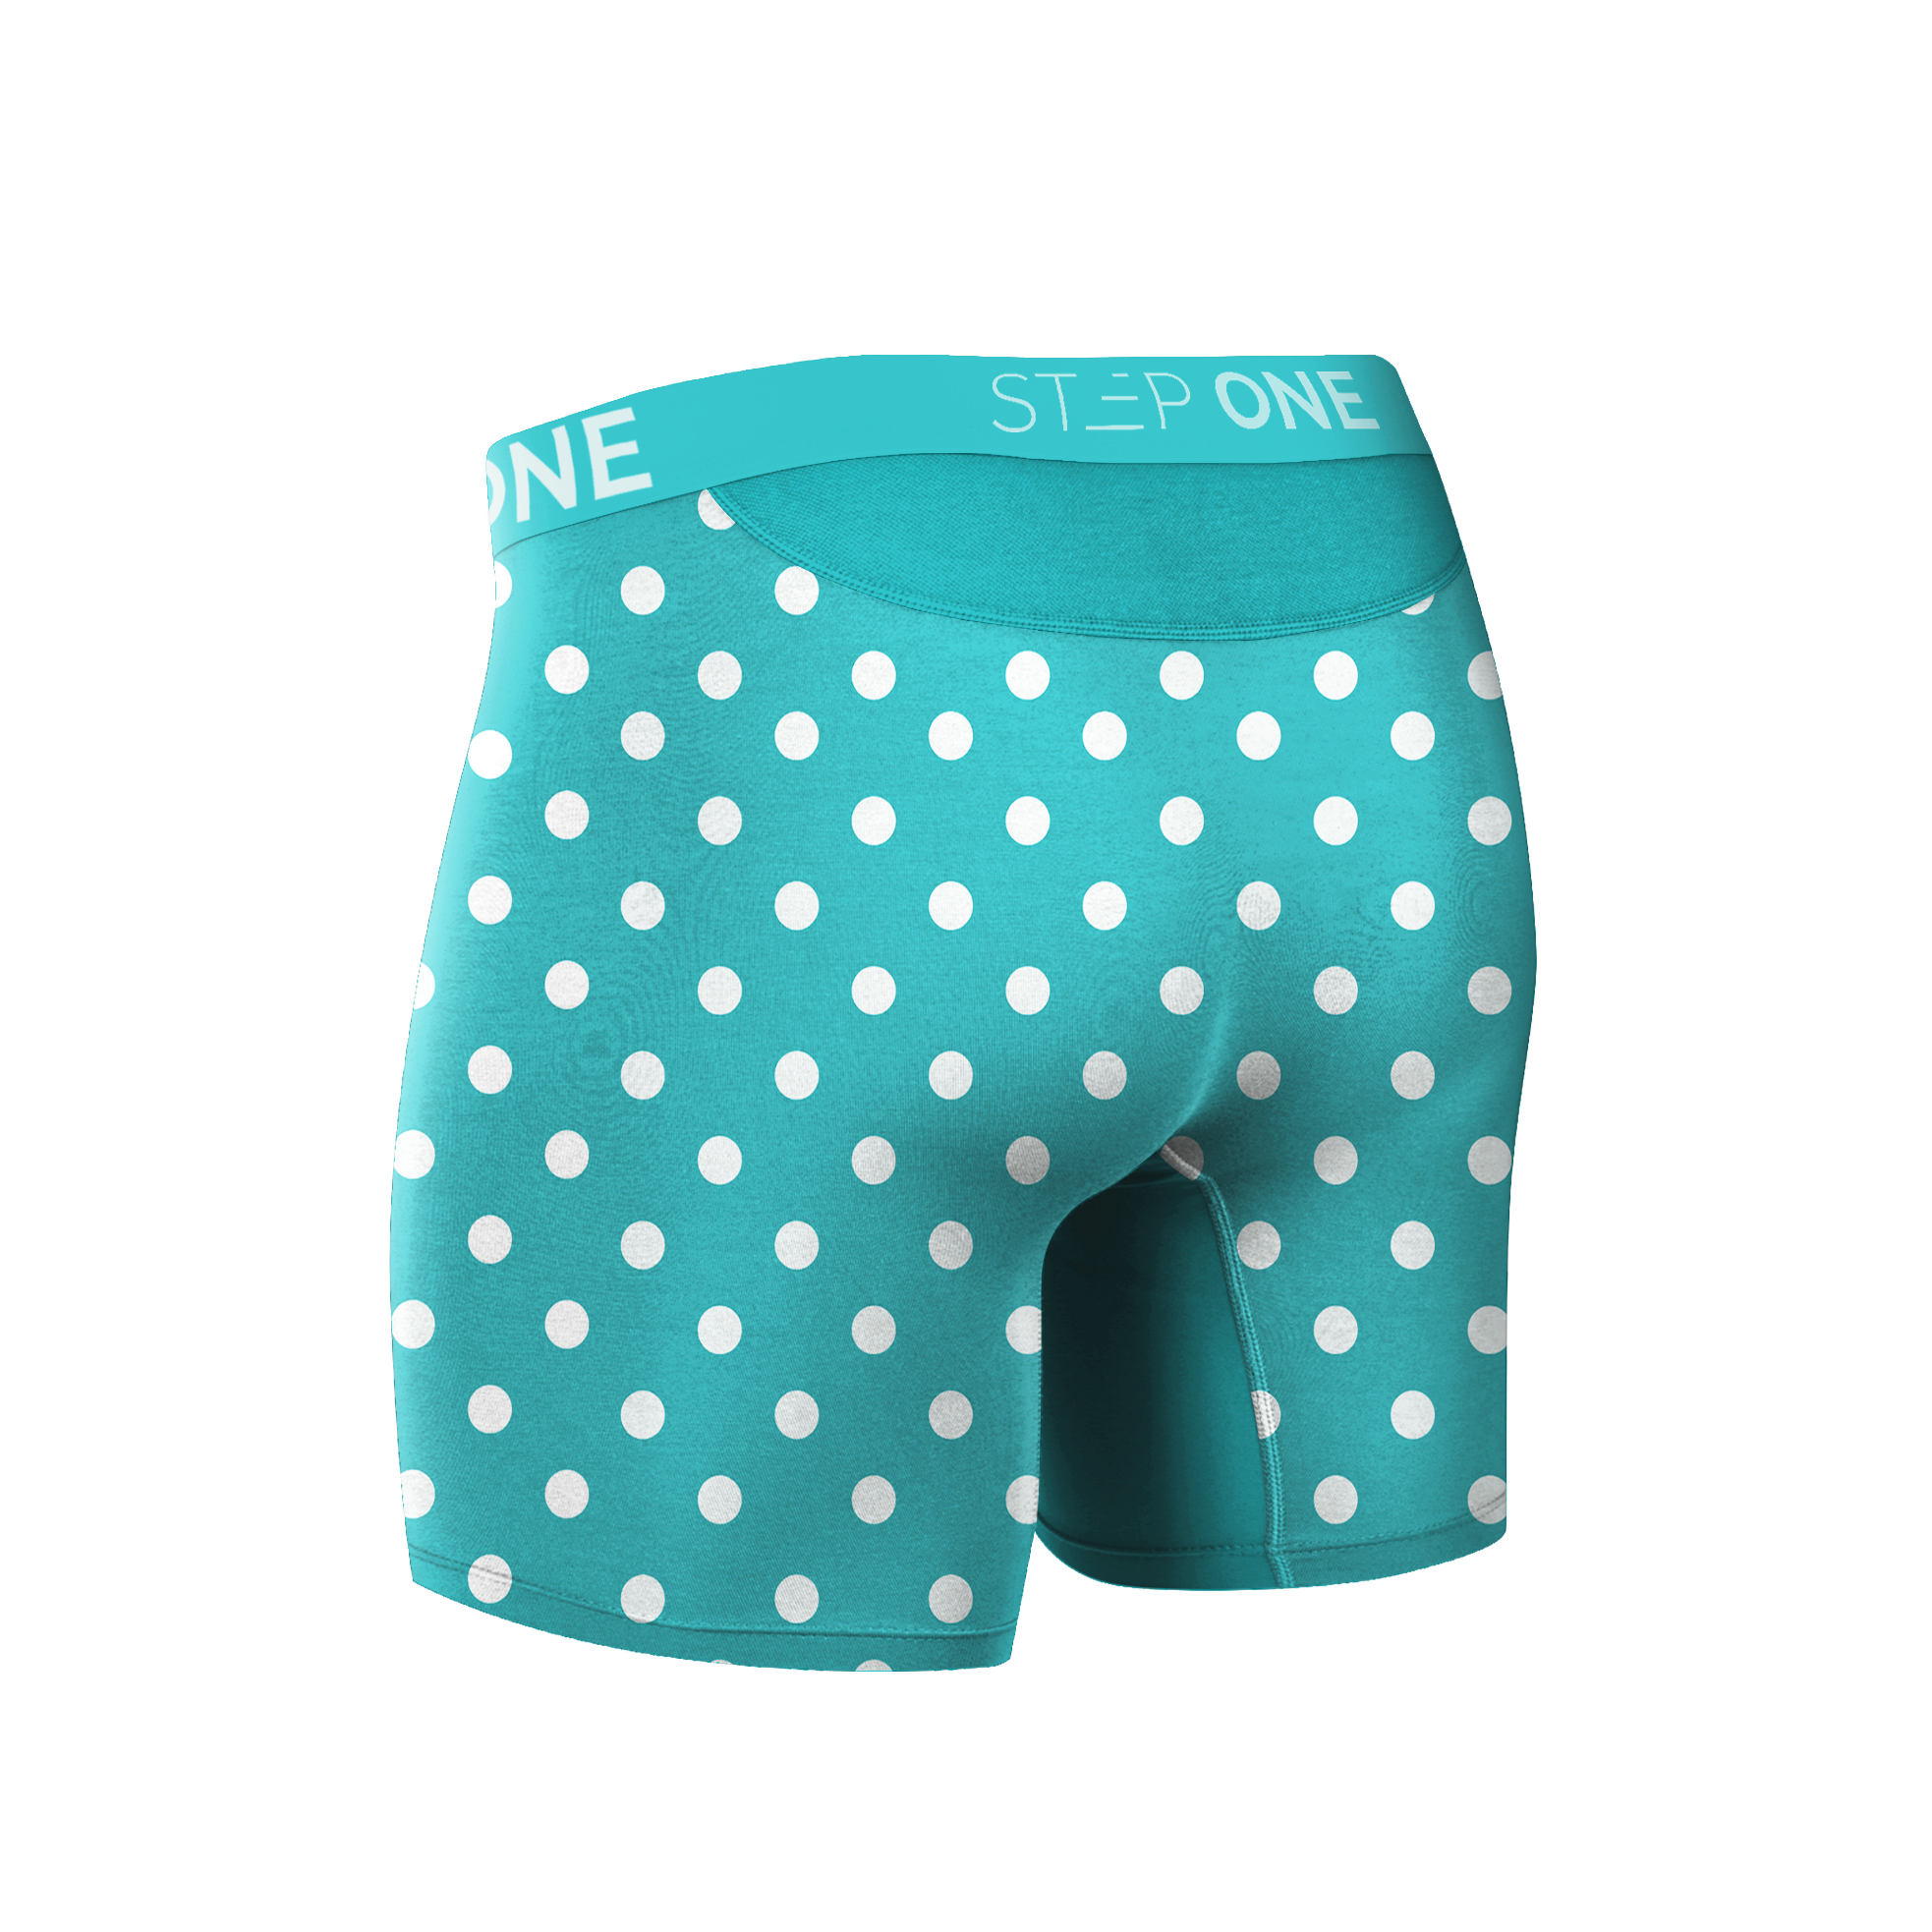 Boxer Brief Fly - Ken Ell - View 2